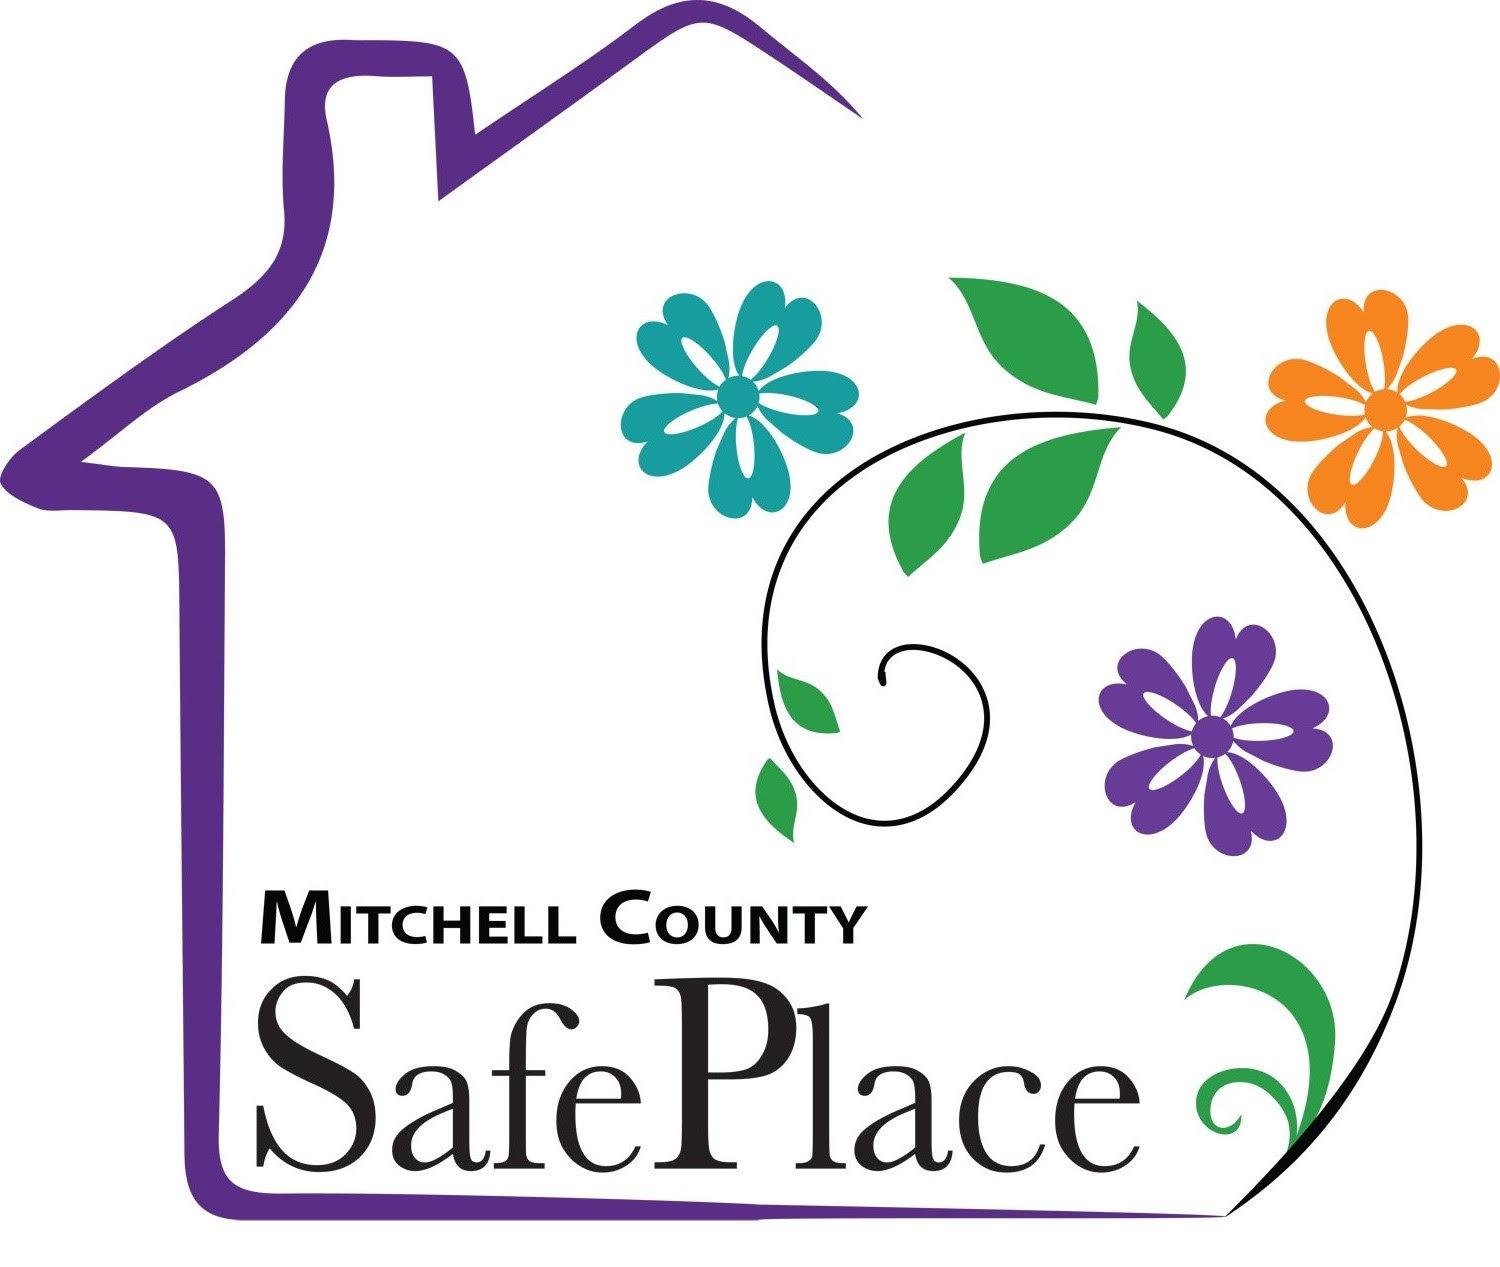 Mitchell County SafePlace